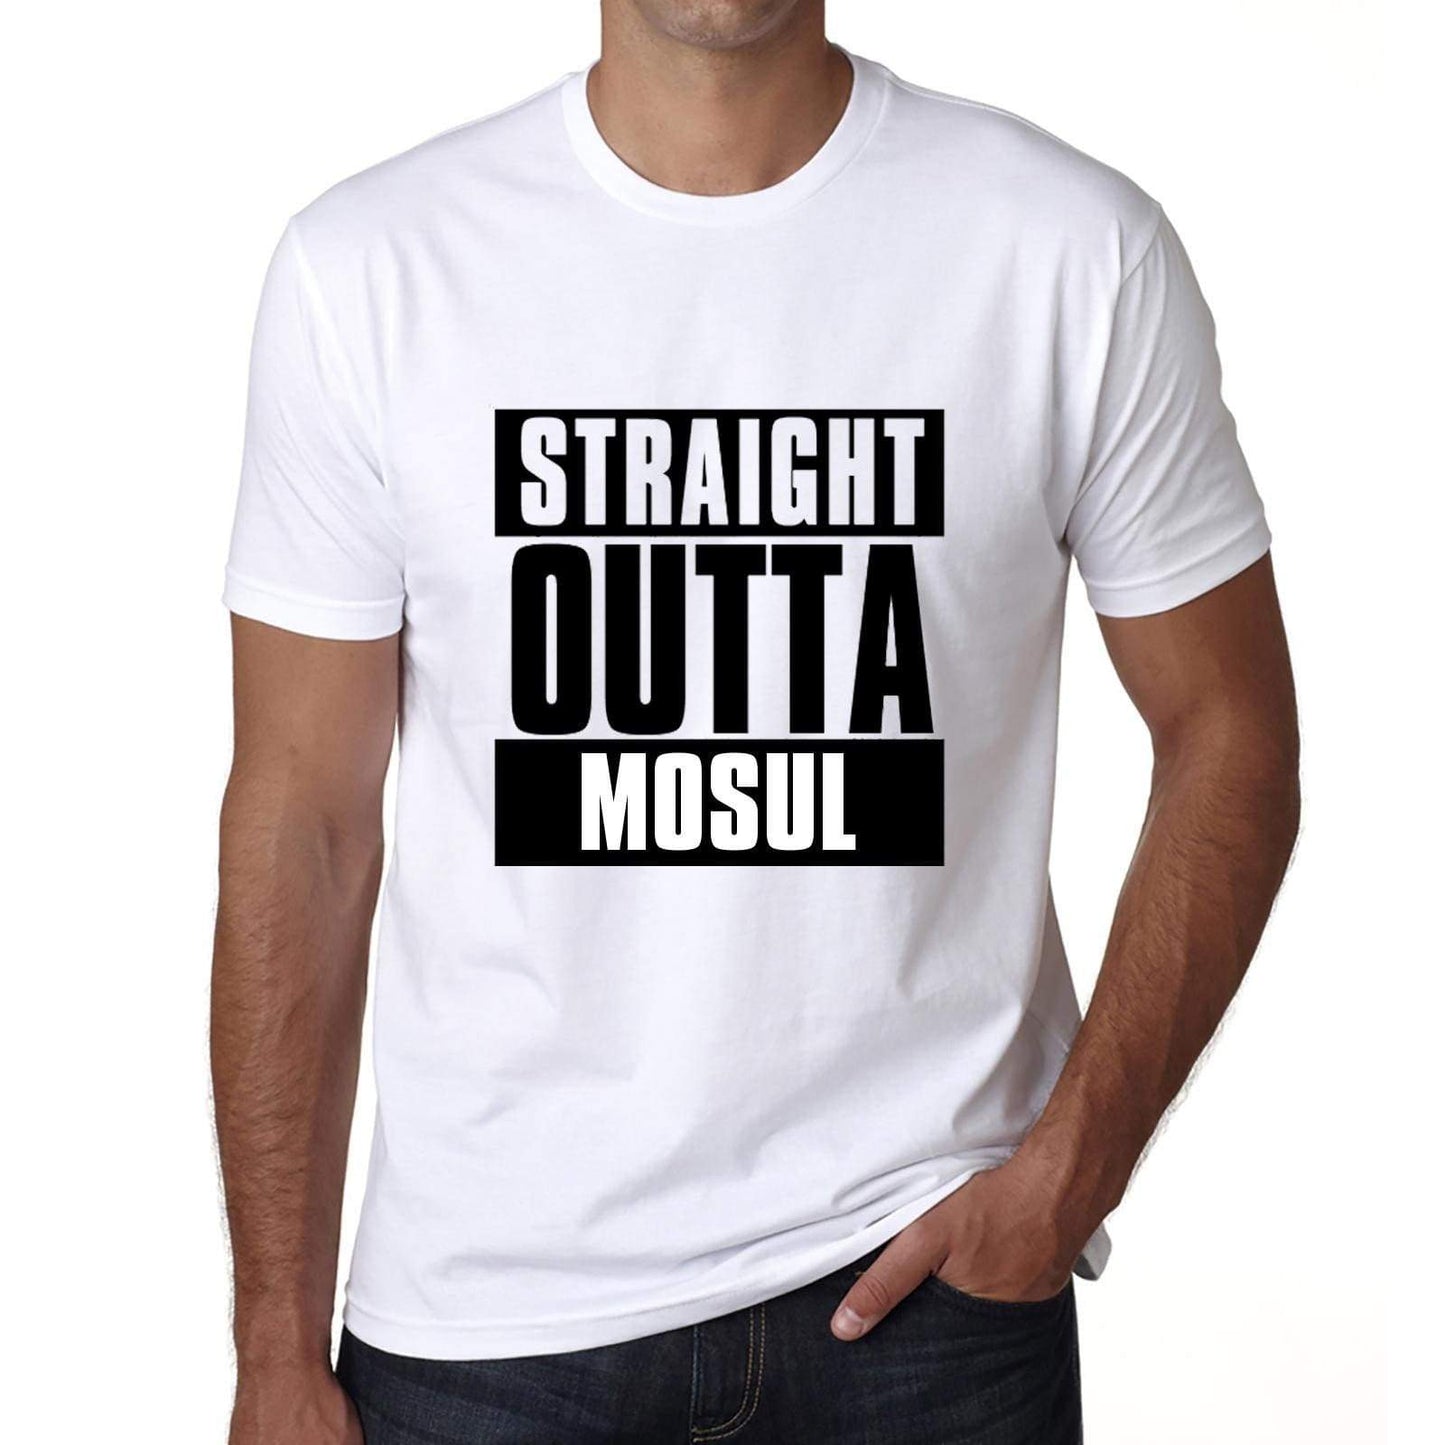 Straight Outta Mosul Mens Short Sleeve Round Neck T-Shirt 00027 - White / S - Casual